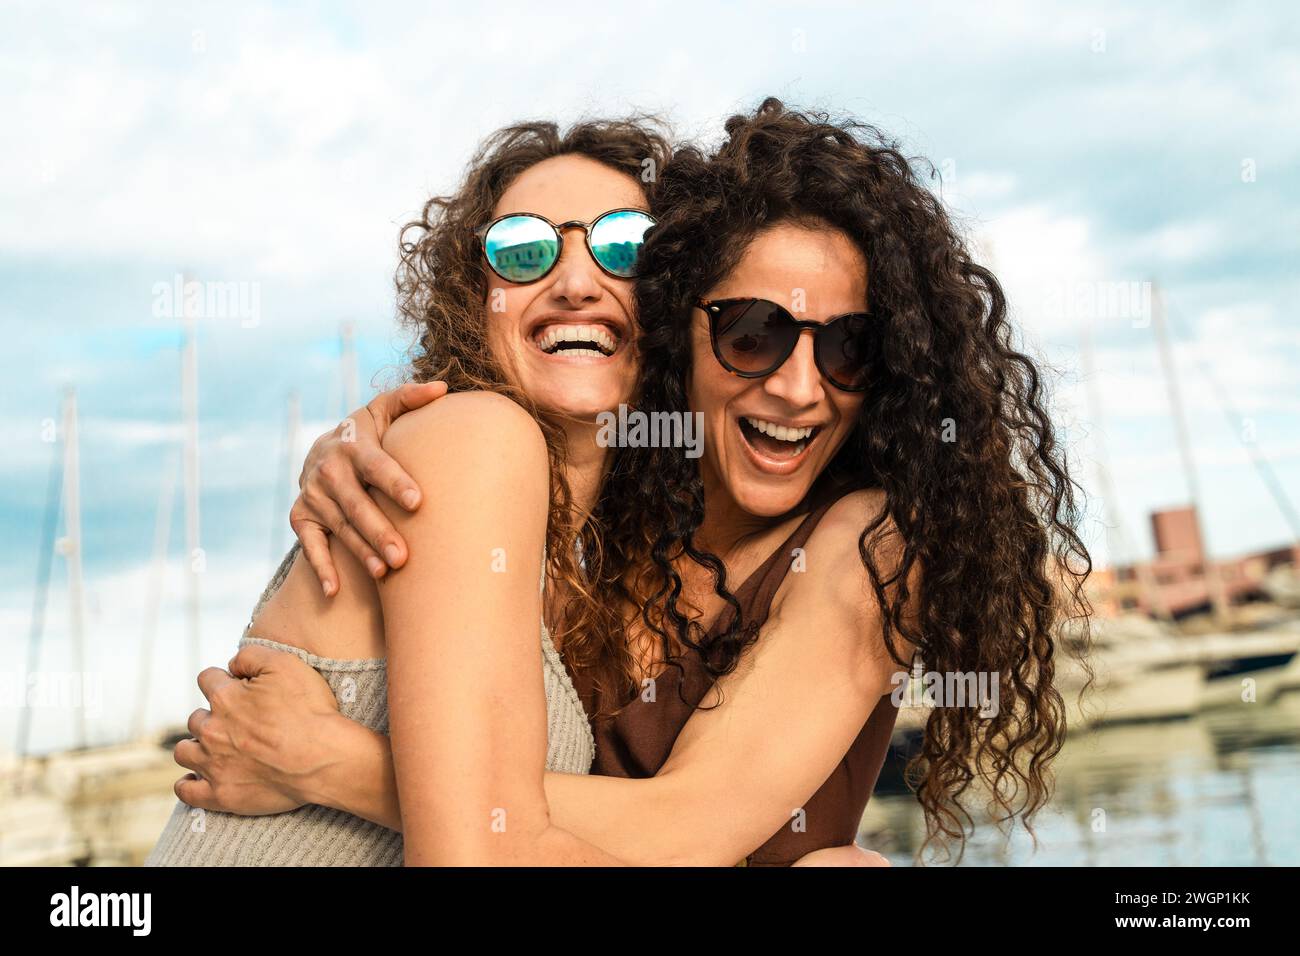 Two close friends share a hug and laughter on a yacht, cherishing the moment. Stock Photo